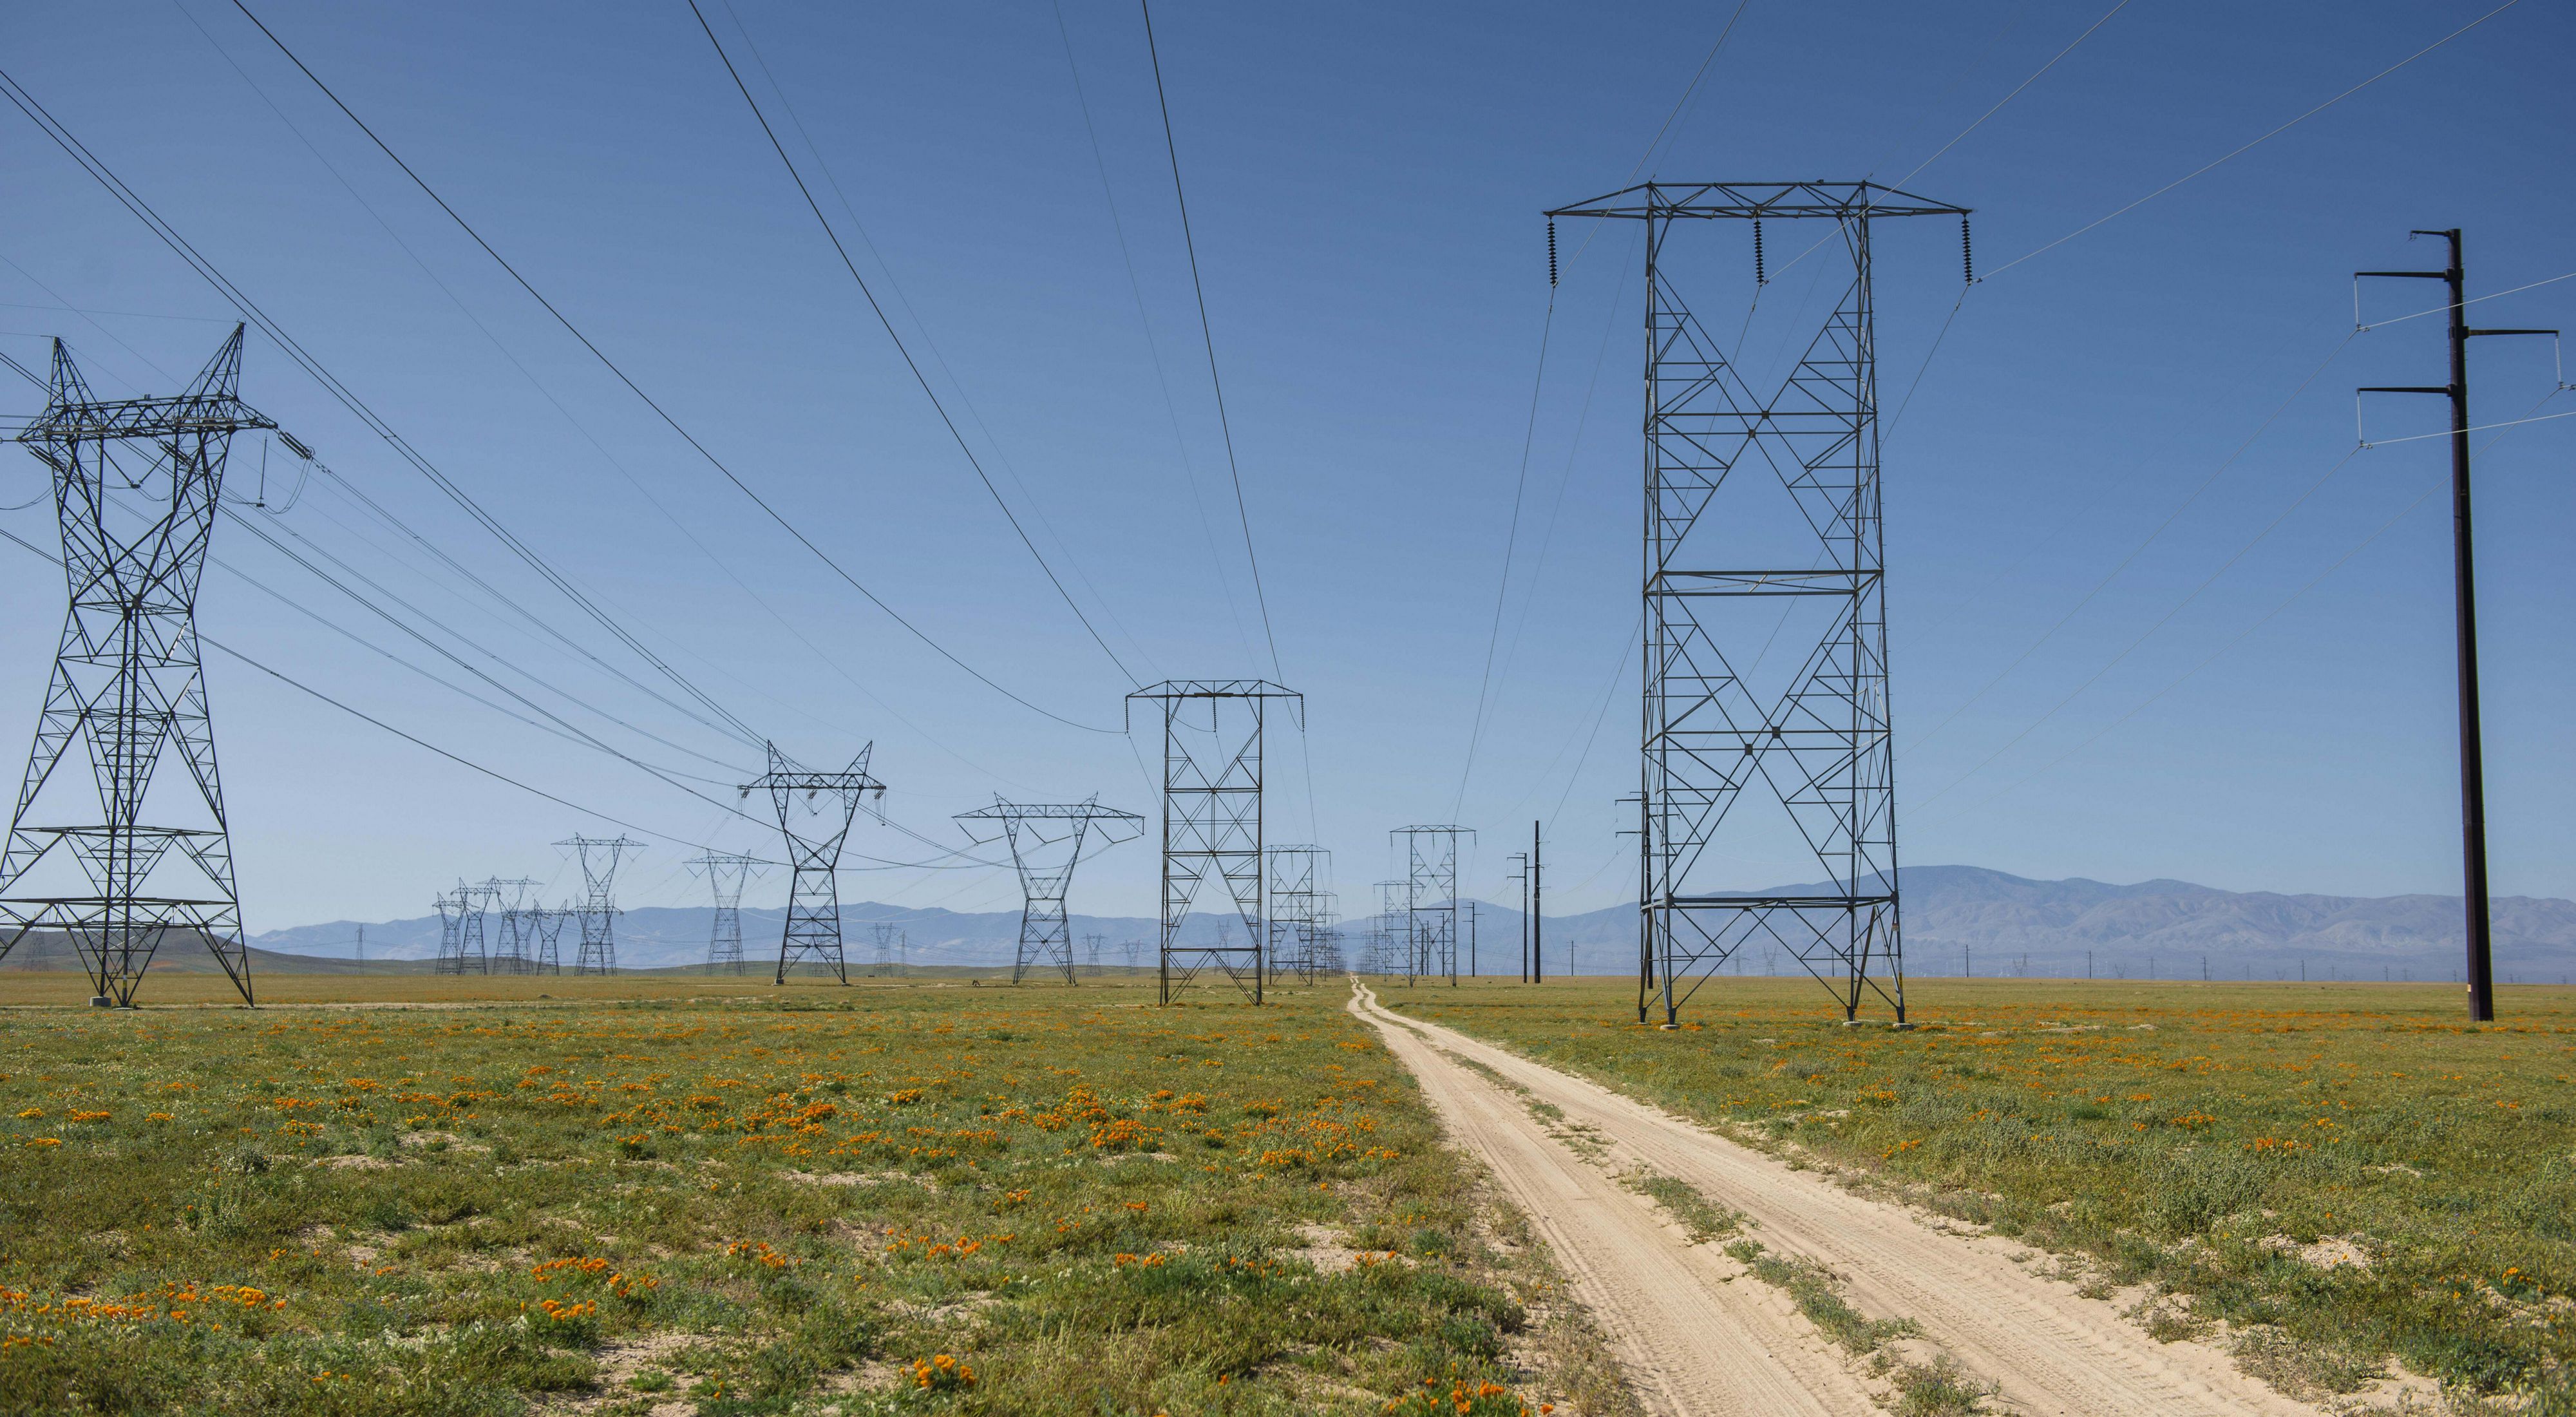 Power lines tower above an expanse of flowering poppies in Antelope Valley, California.